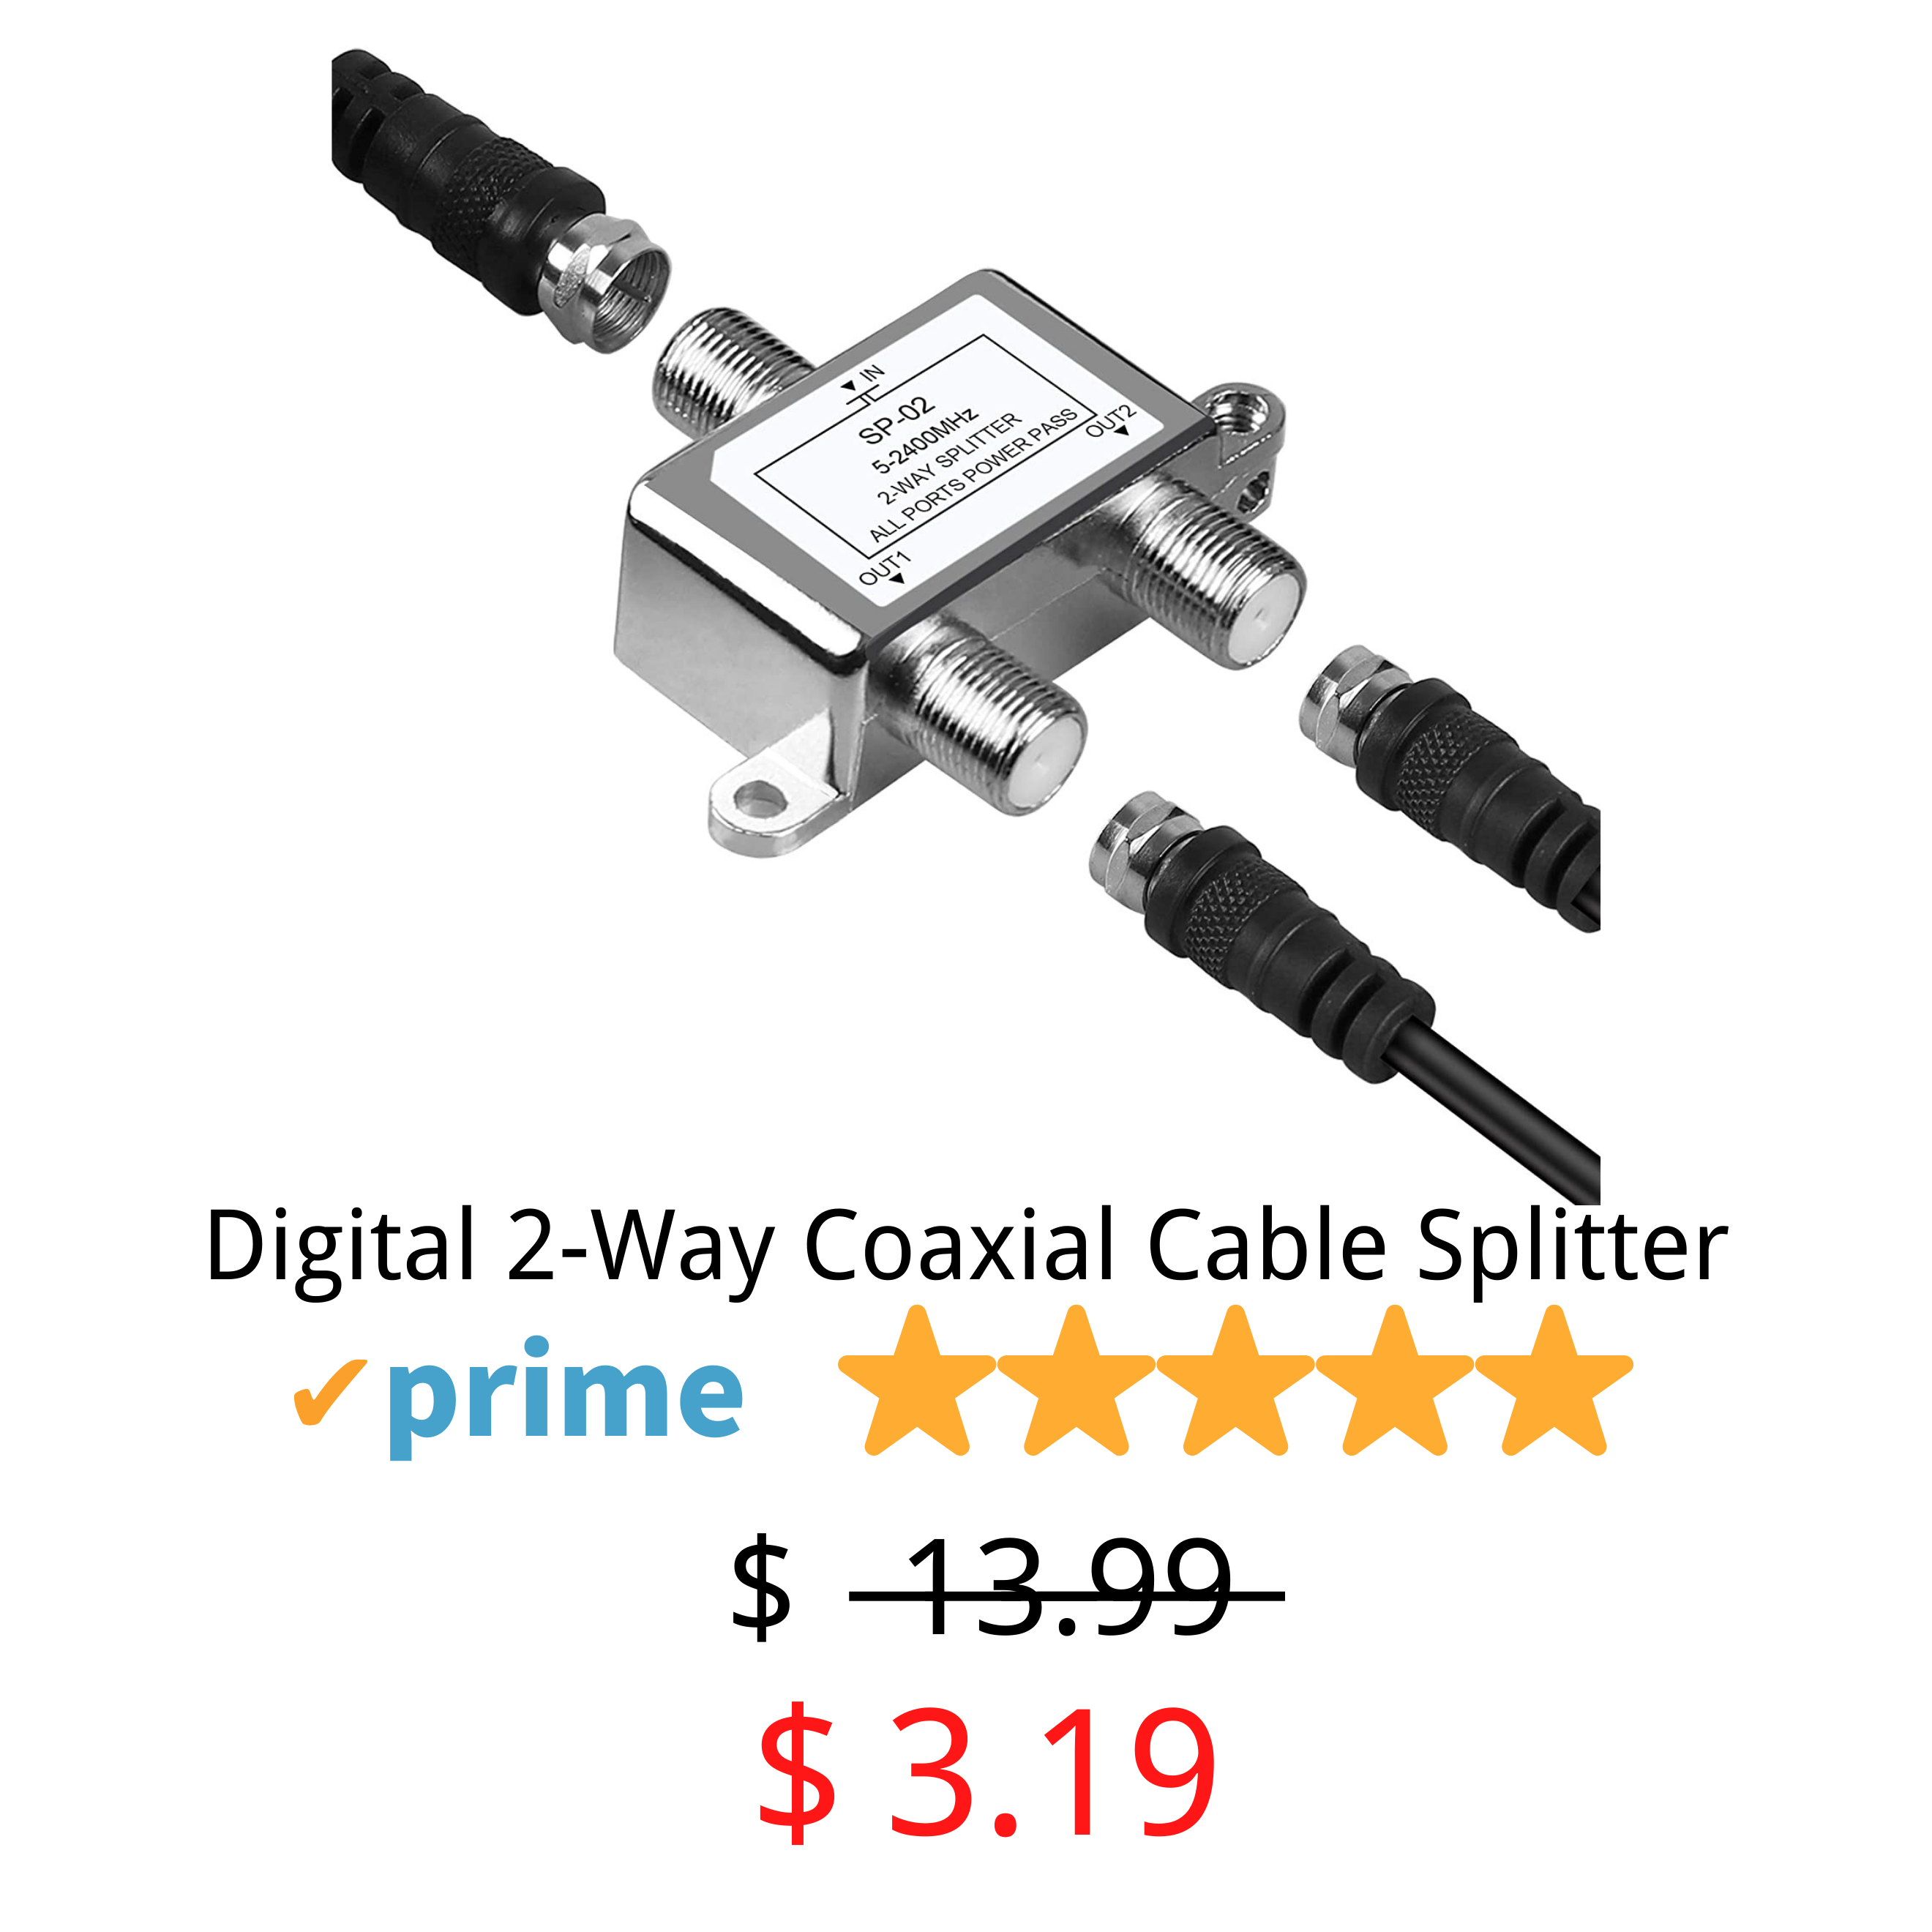 NEWCARE Digital 2-Way Coaxial Cable Splitter 5-2400MHz, RG6 Compatible, Work with Satellite TV, CATV, Antenna System(One Coax Cable Included)